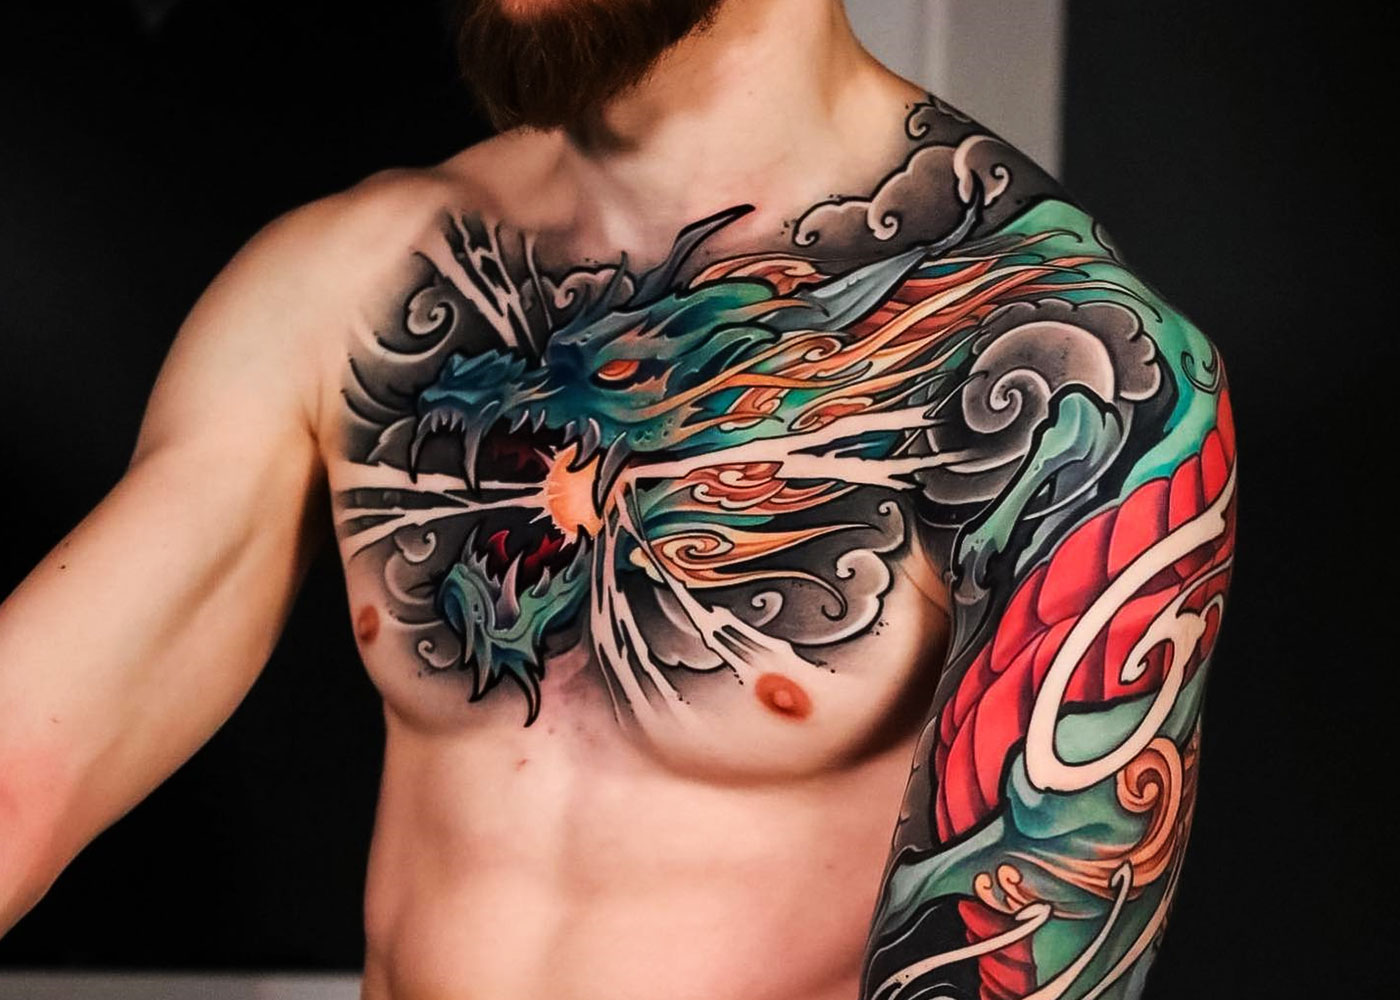 15481 Japanese Dragon Tattoo Images Stock Photos  Vectors  Shutterstock